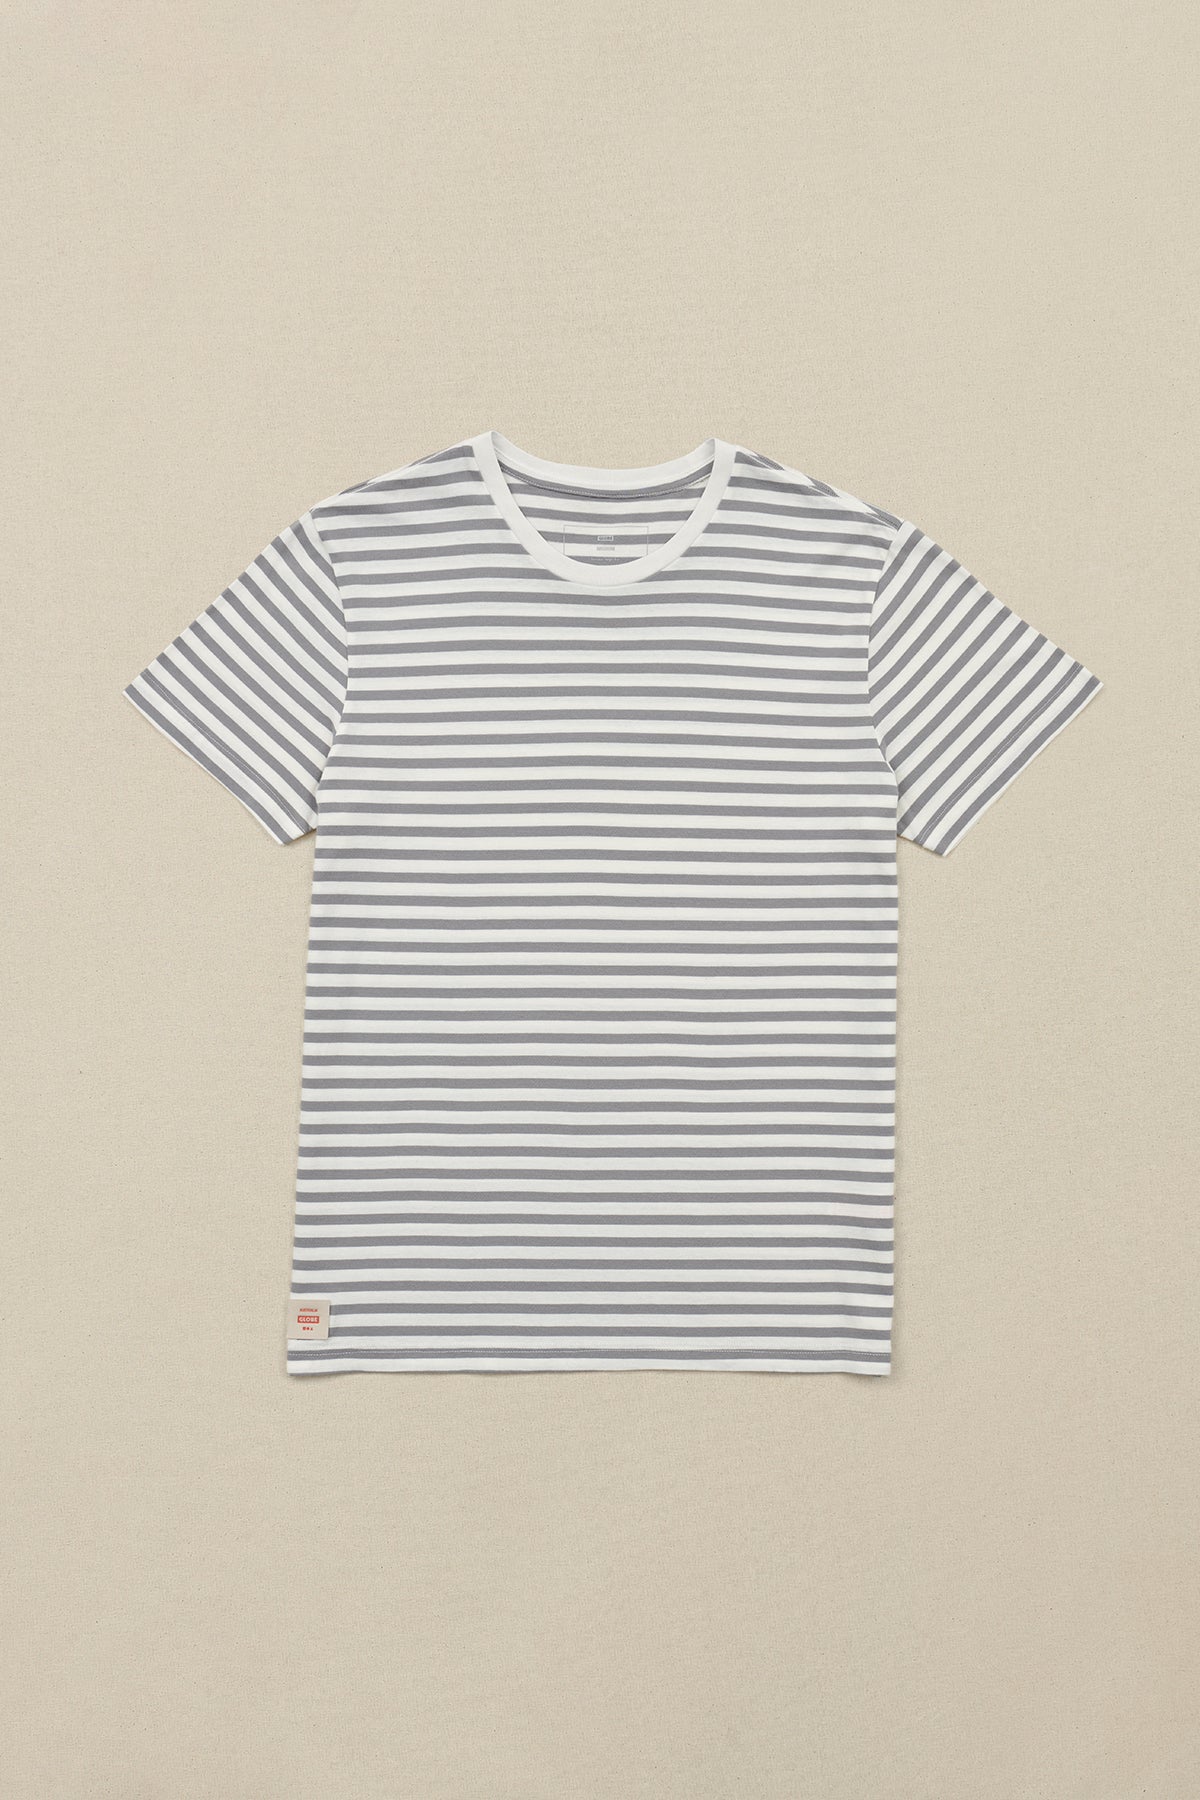 front viewing of Globe white striped tee